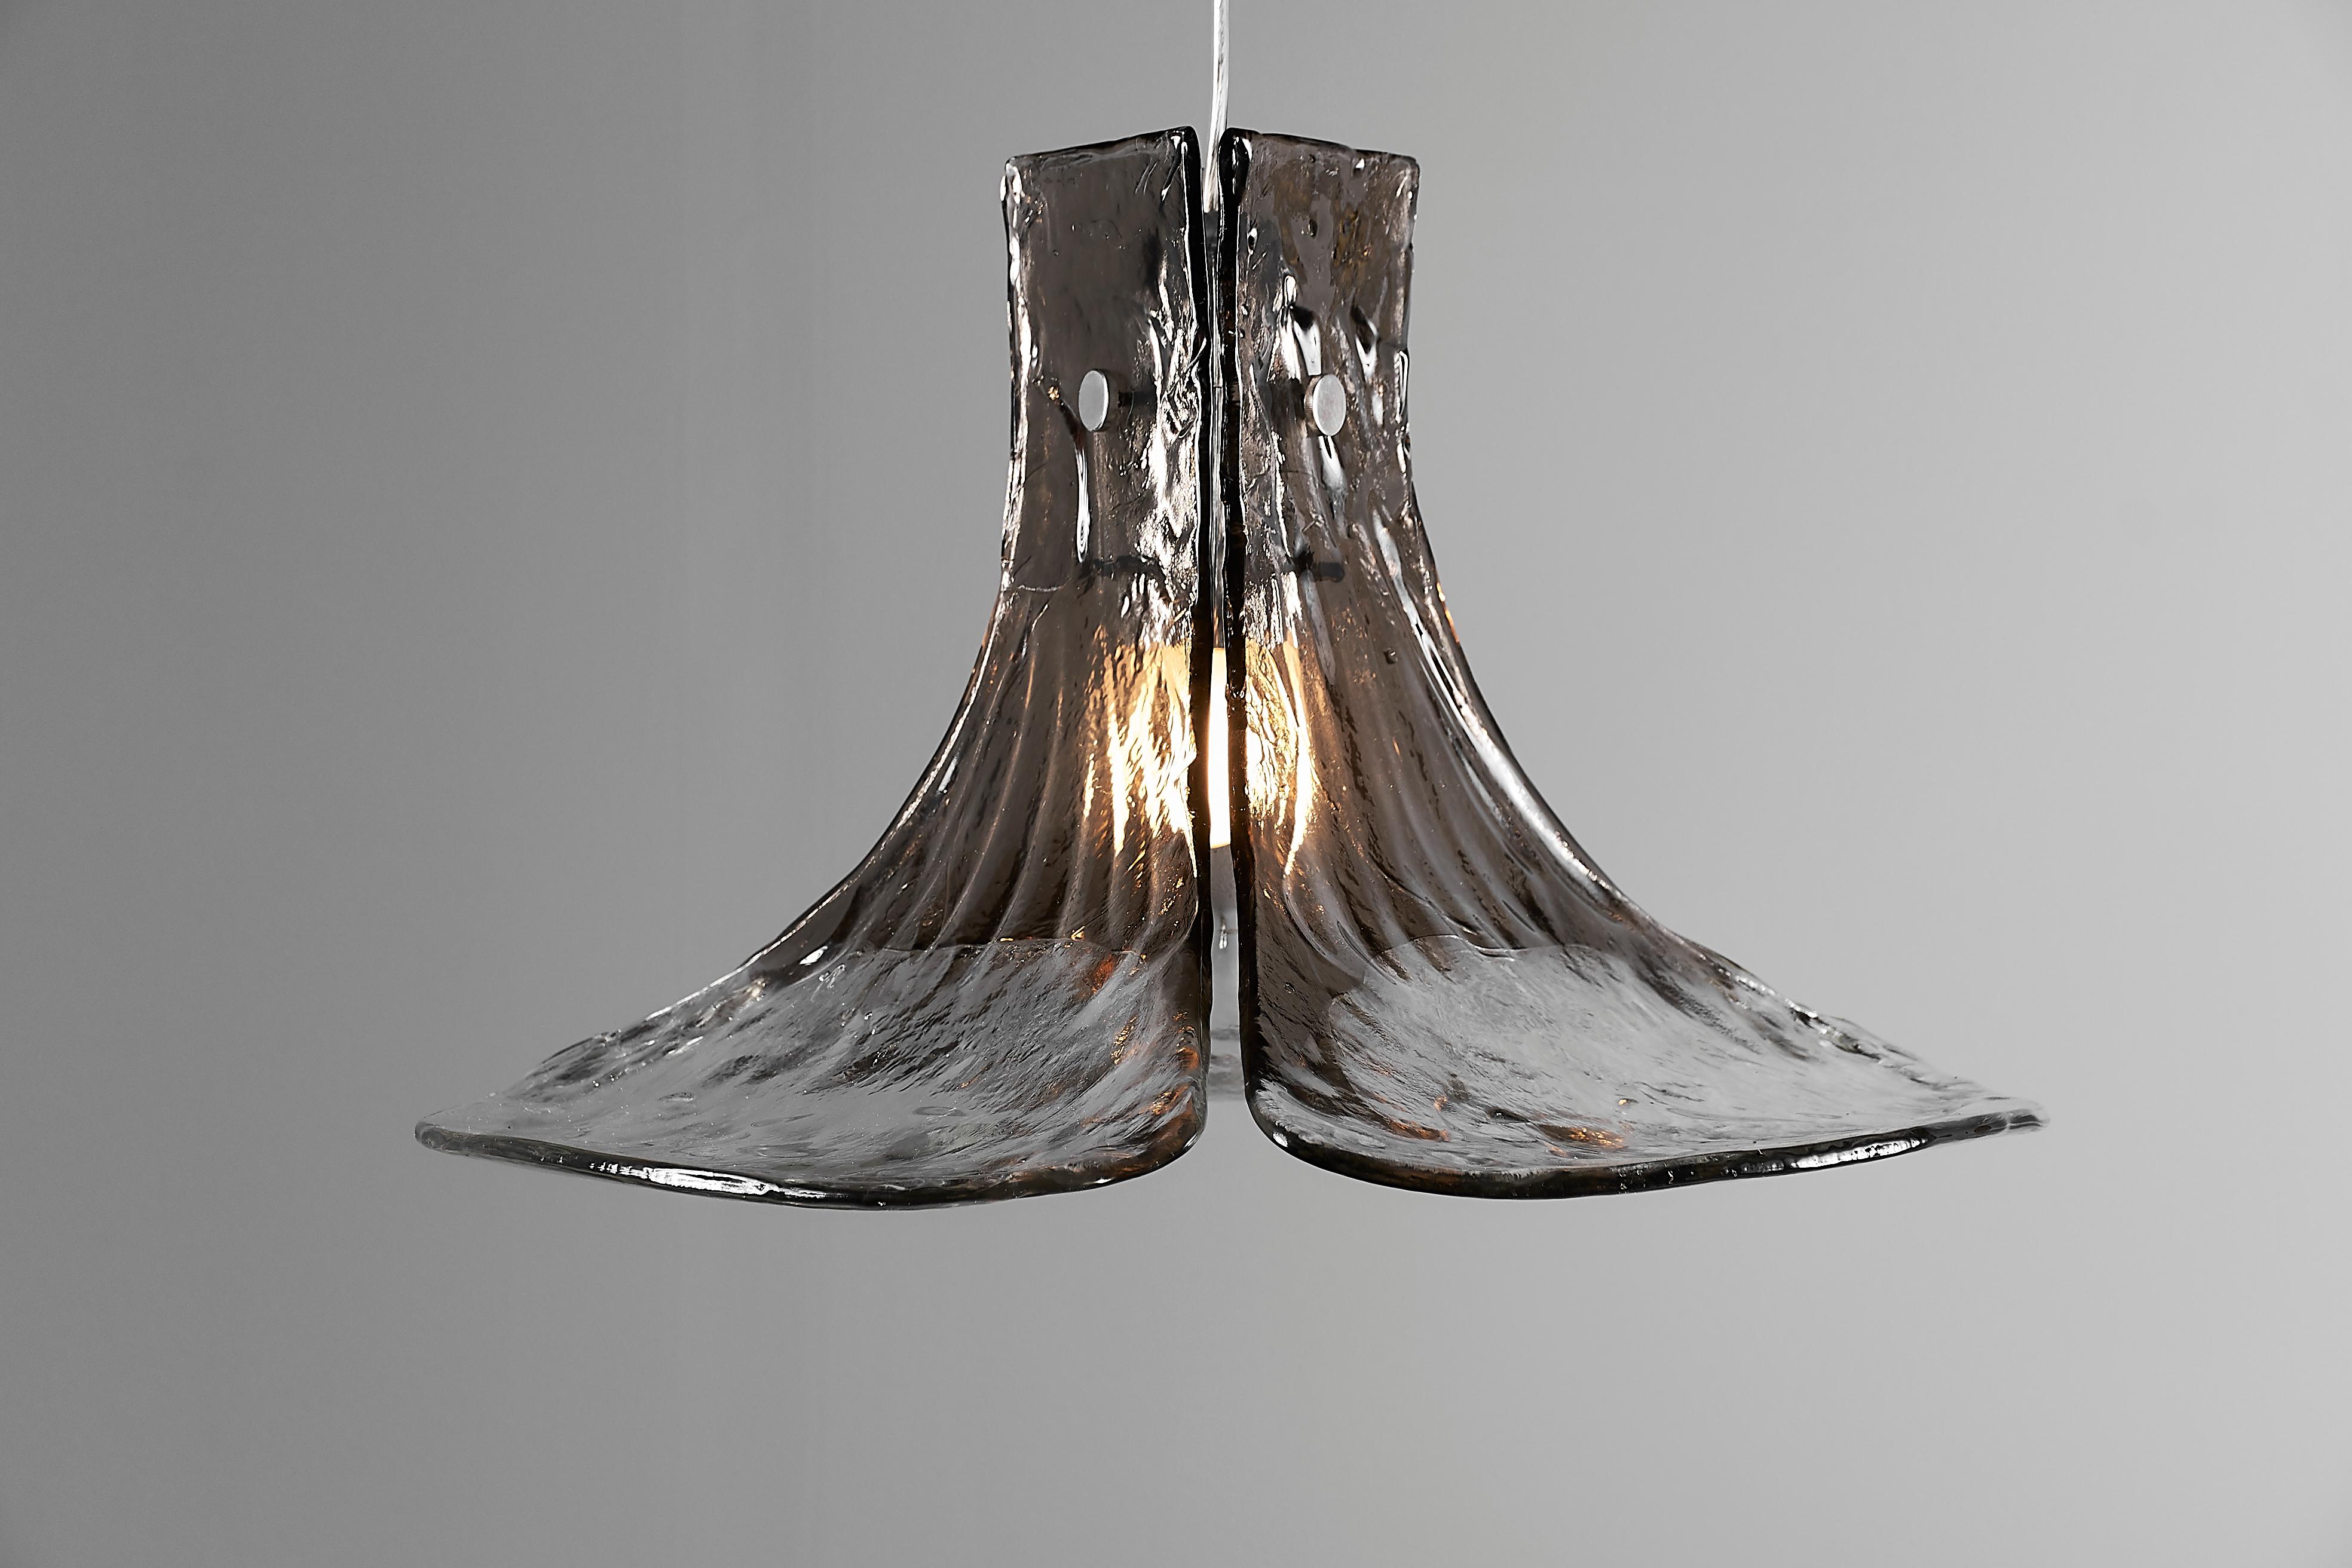 Mid-Century Modern floral pendant light. Three large and very thick hand blown clear and smoked Murano glass petals are supported by a metal frame. 

Design by Carlo Nason for Kalmar Franken lighting Austria, handmade by renowned Murano glassworks,